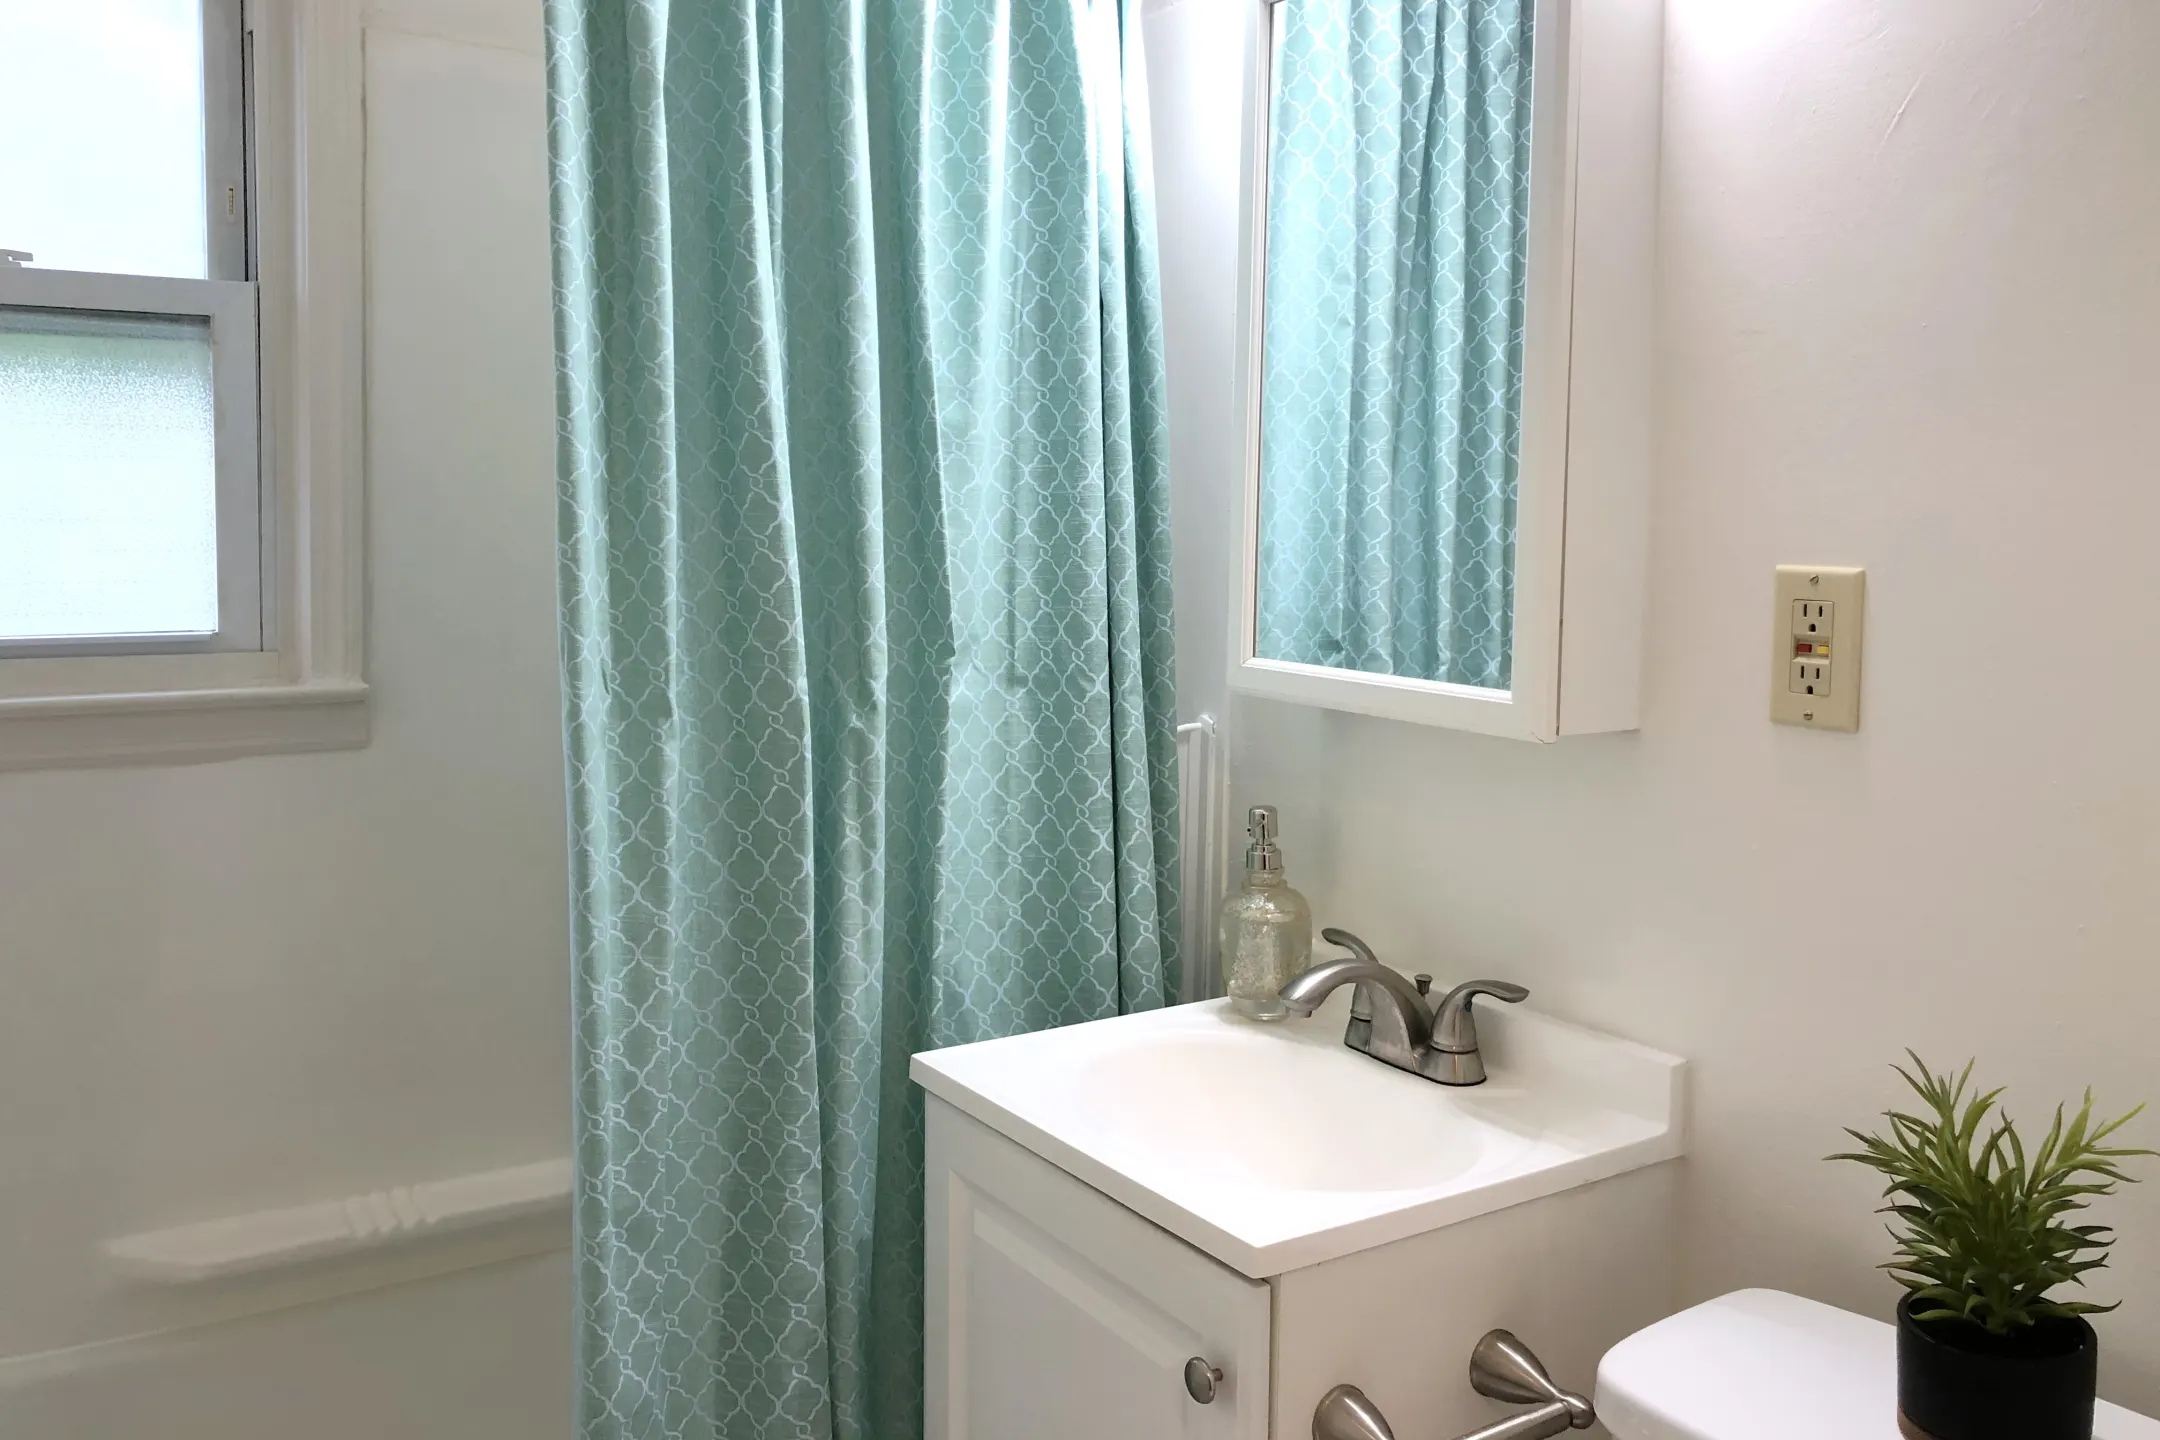 Bathroom - Schuyler Place Apartments - Menands, NY